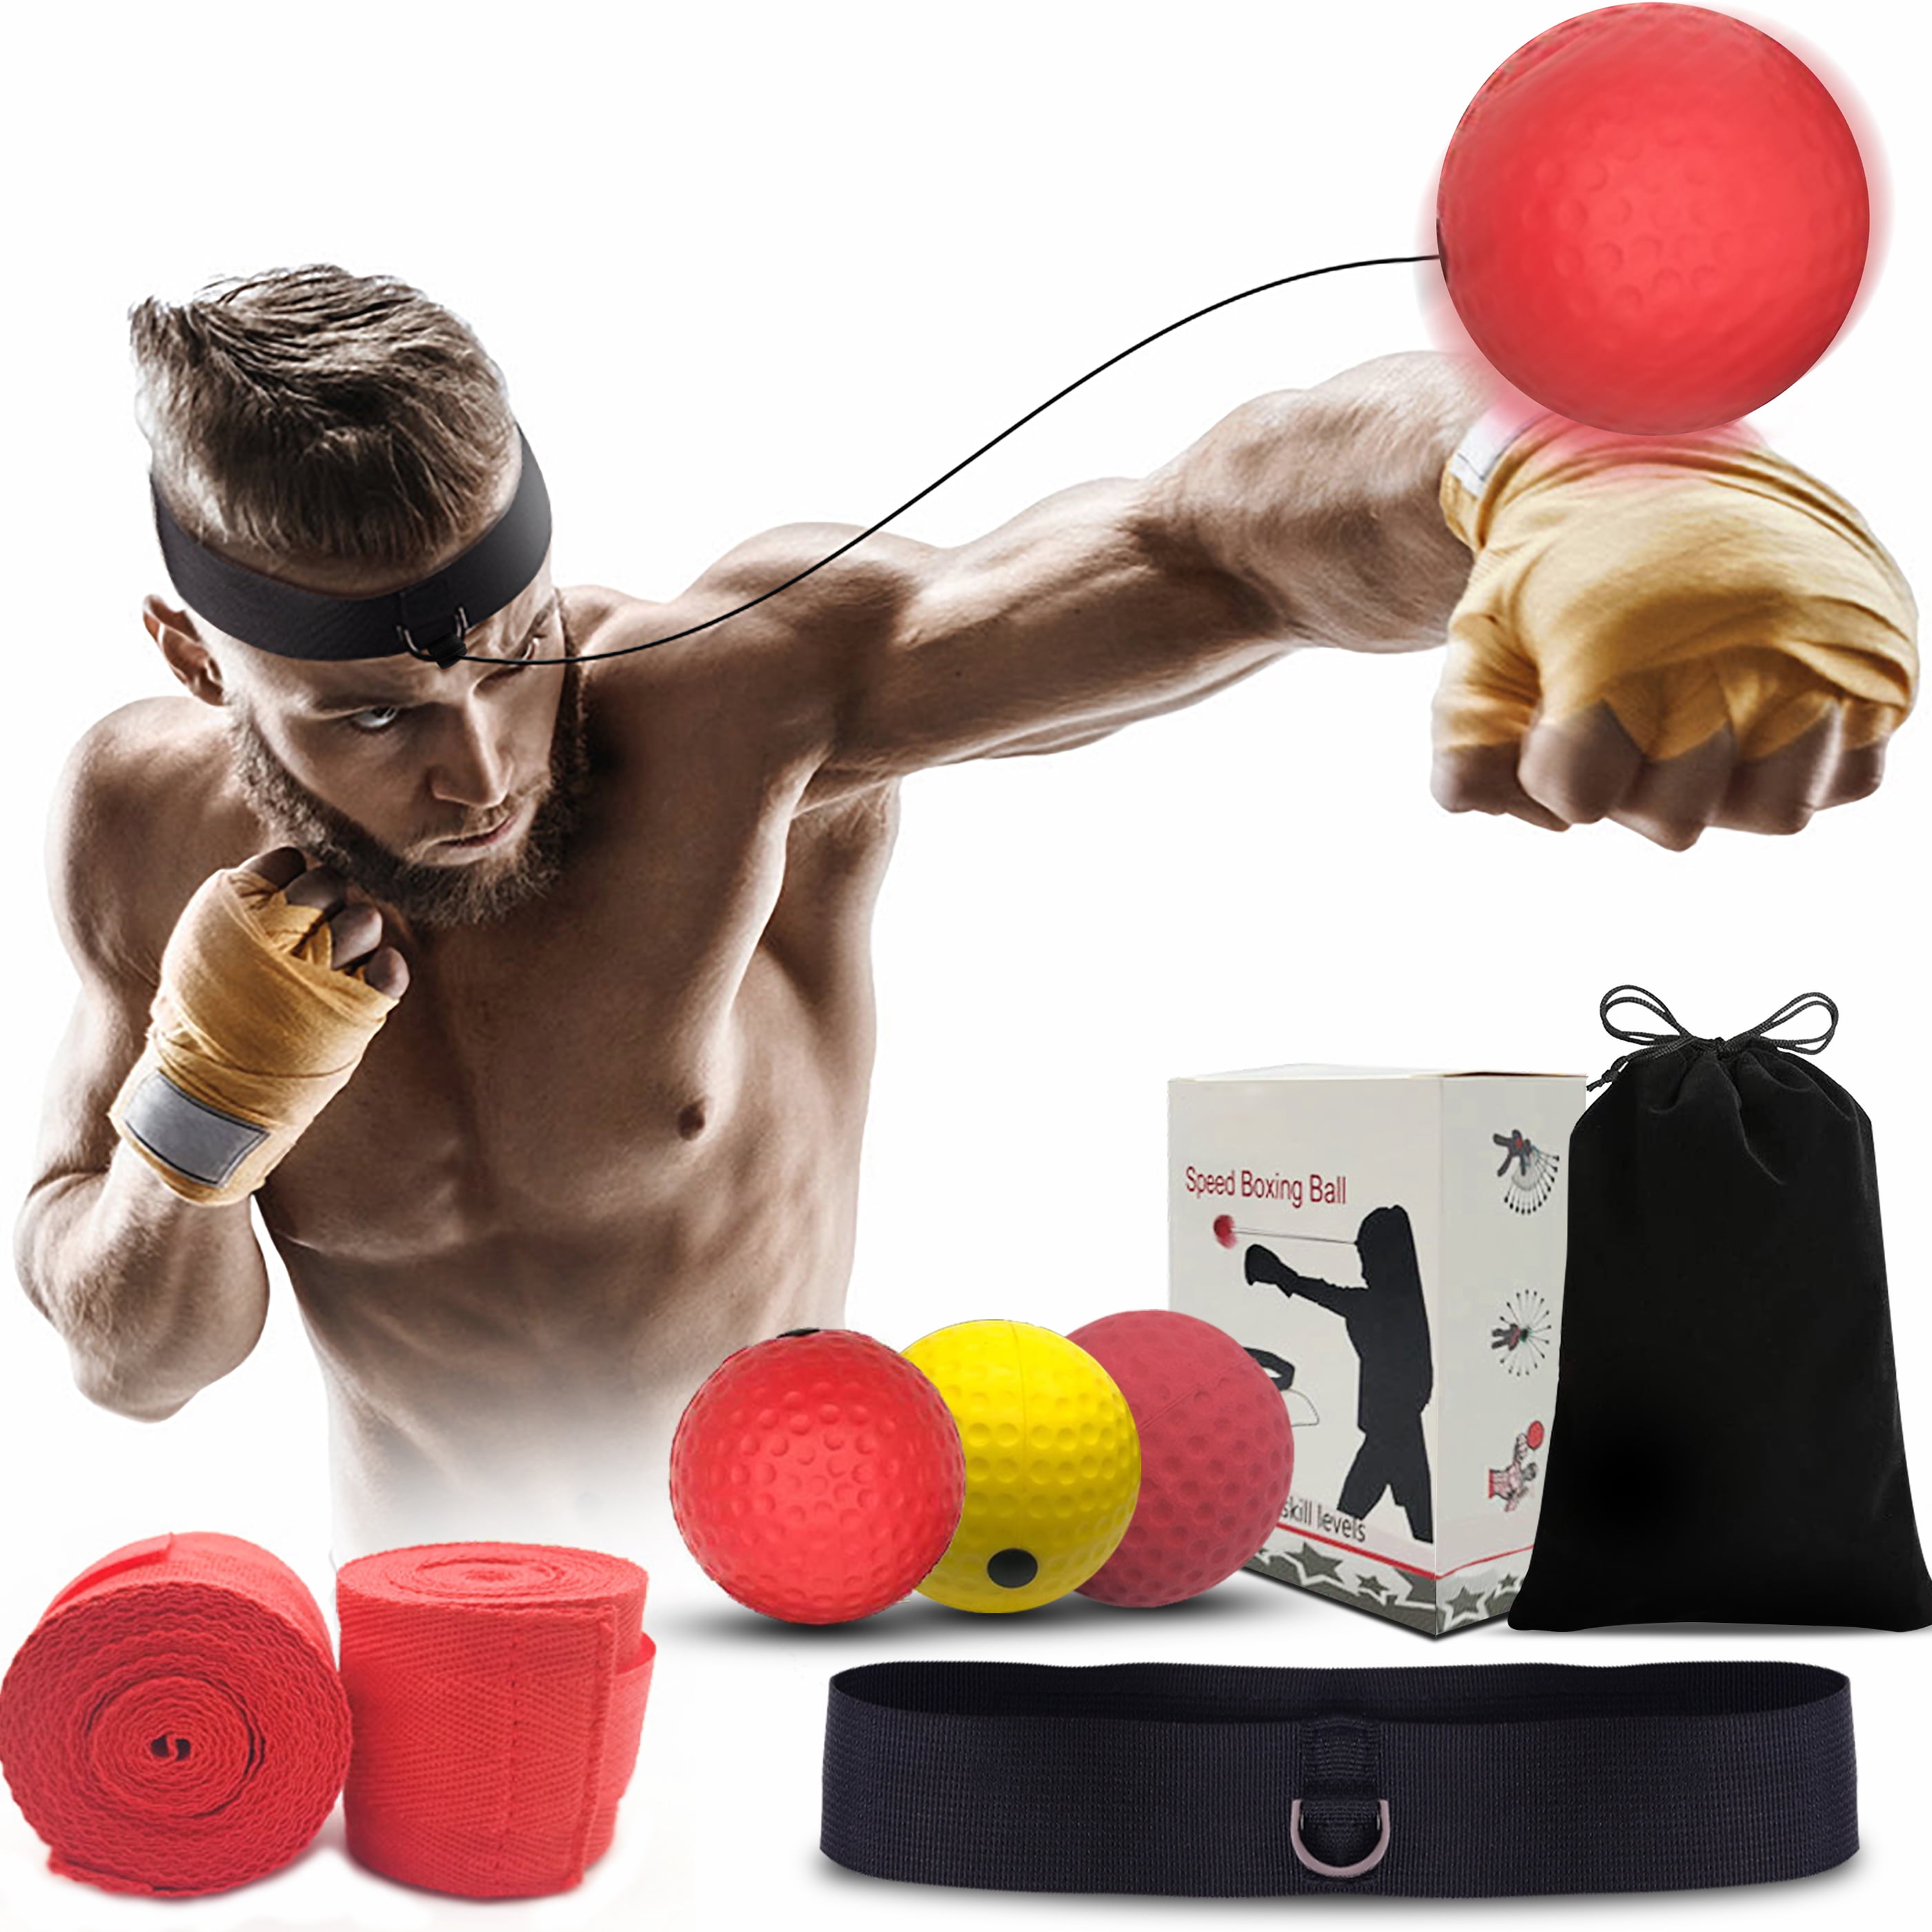 Boxing Reflex Ball Training Ball Mma Speed Training Suitable for Adult/Kids 